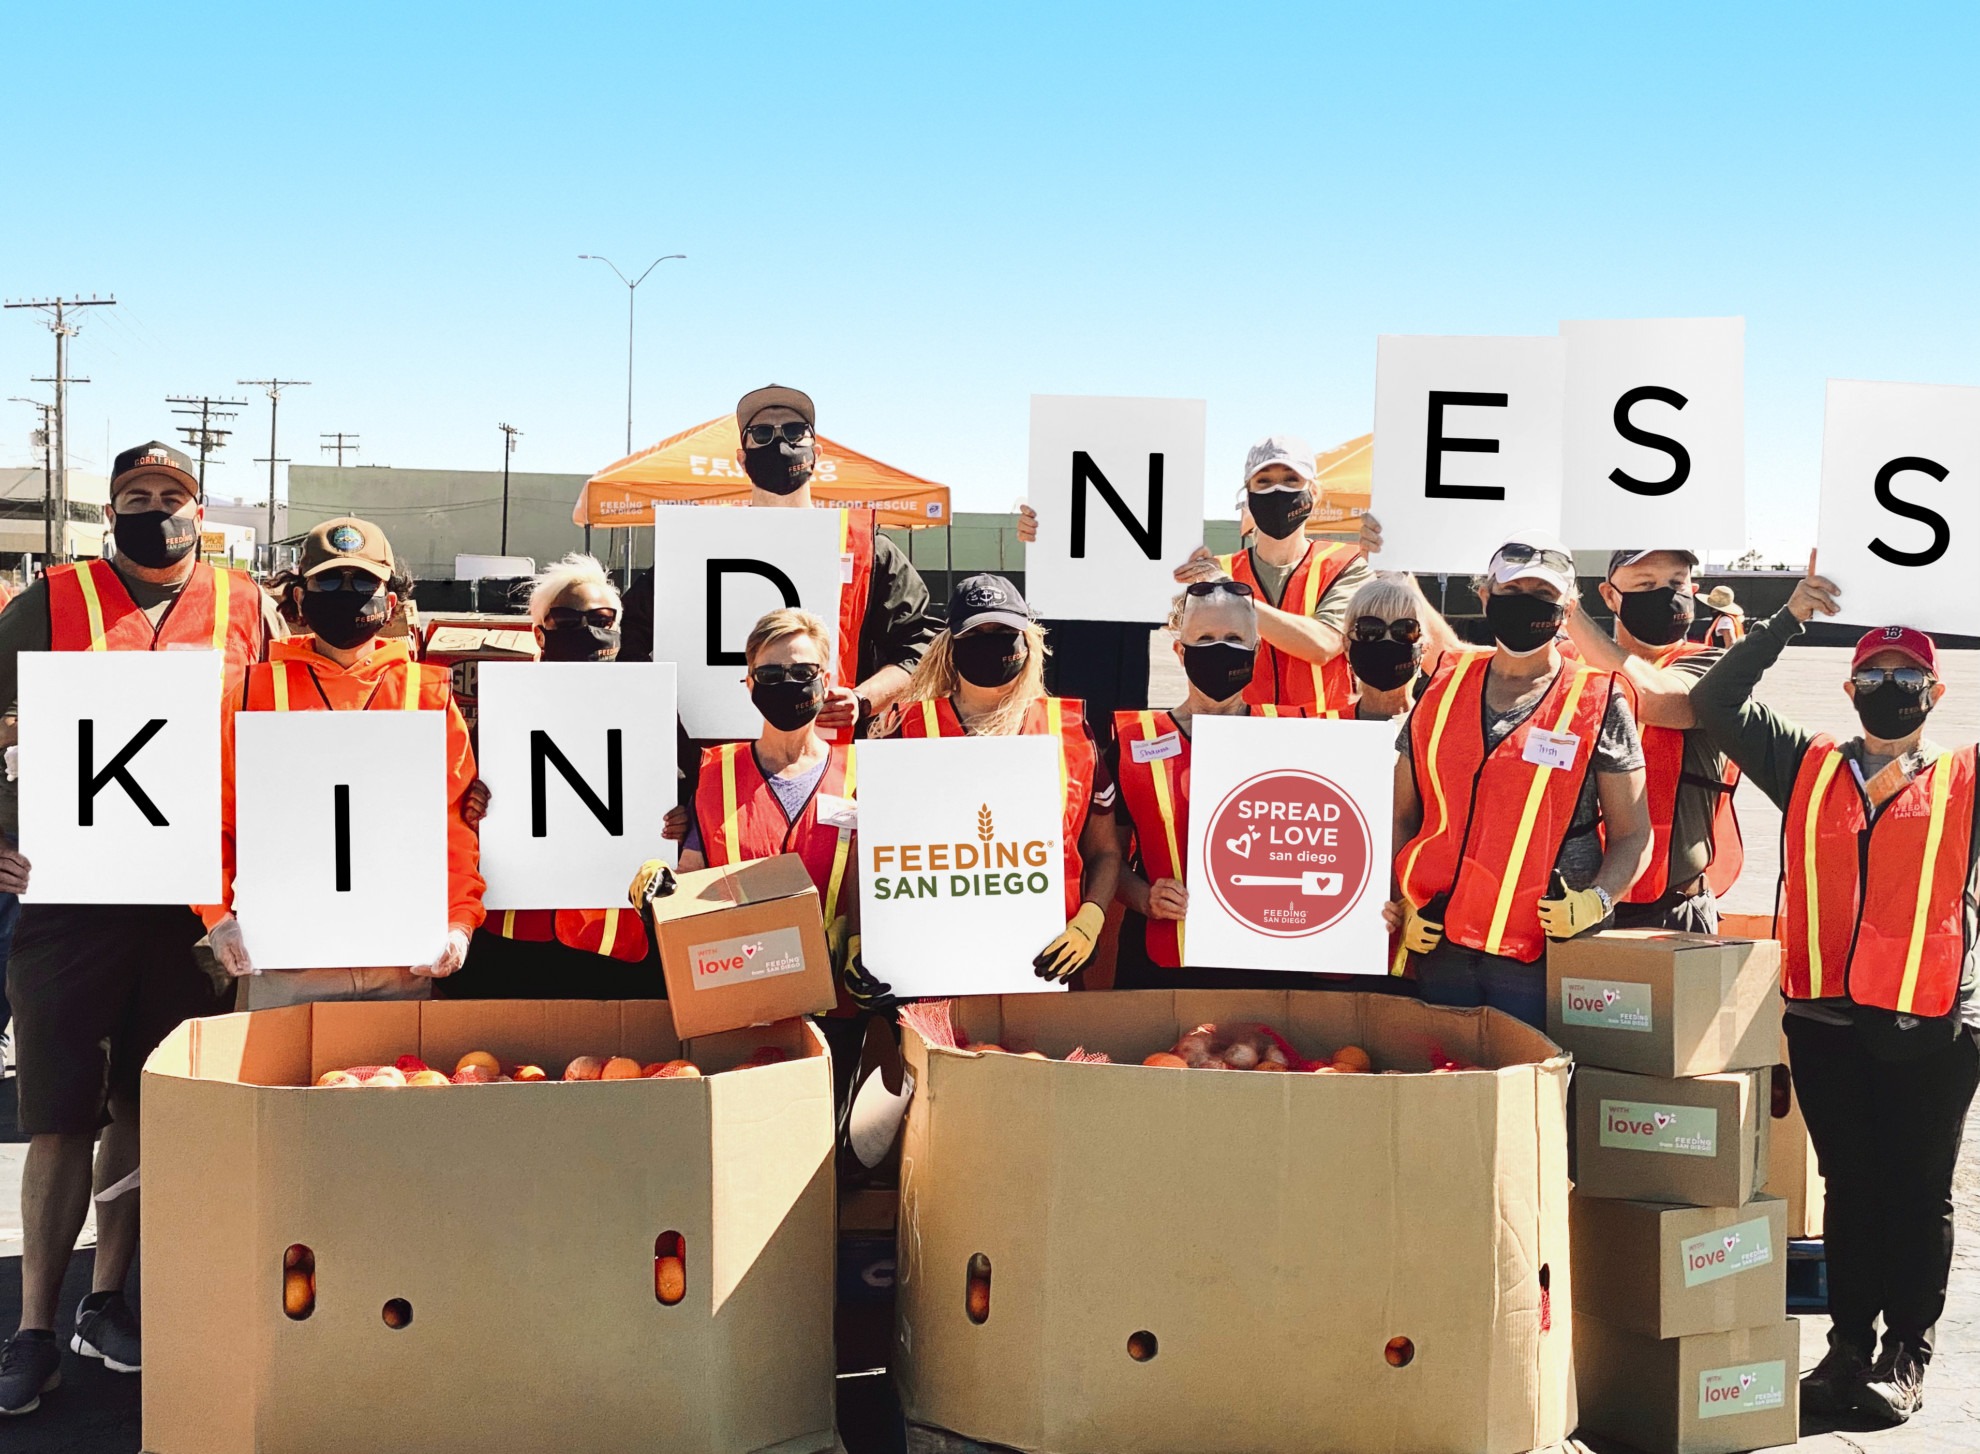 Volunteers at distribution hold up letters to spell "Kindness"